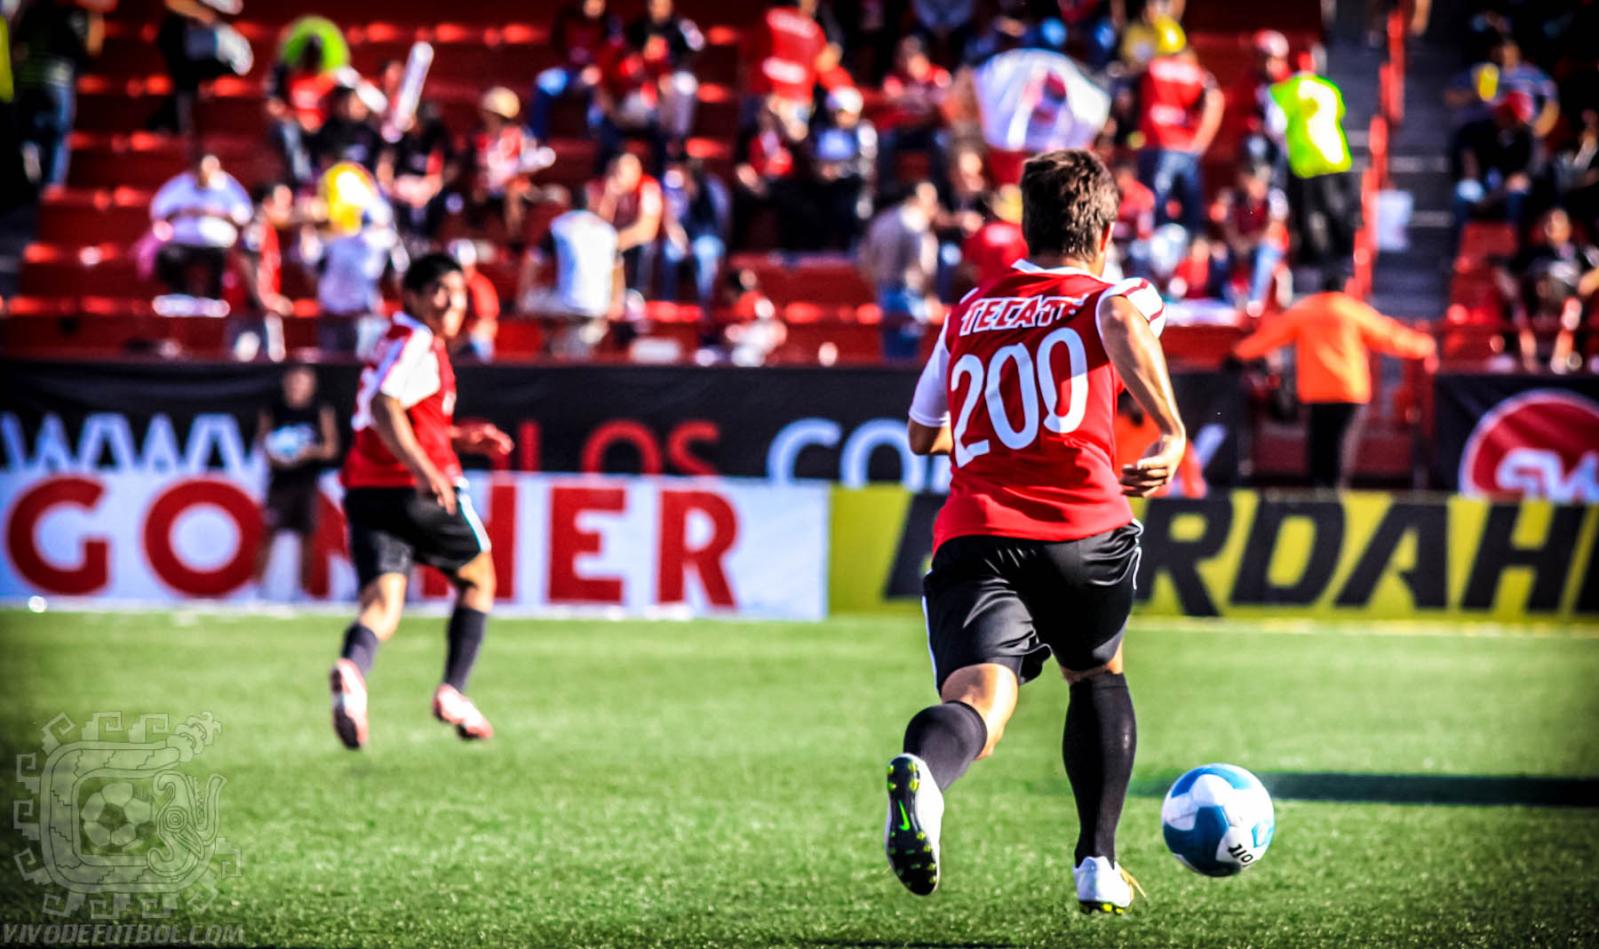 a soccer player is playing on the field